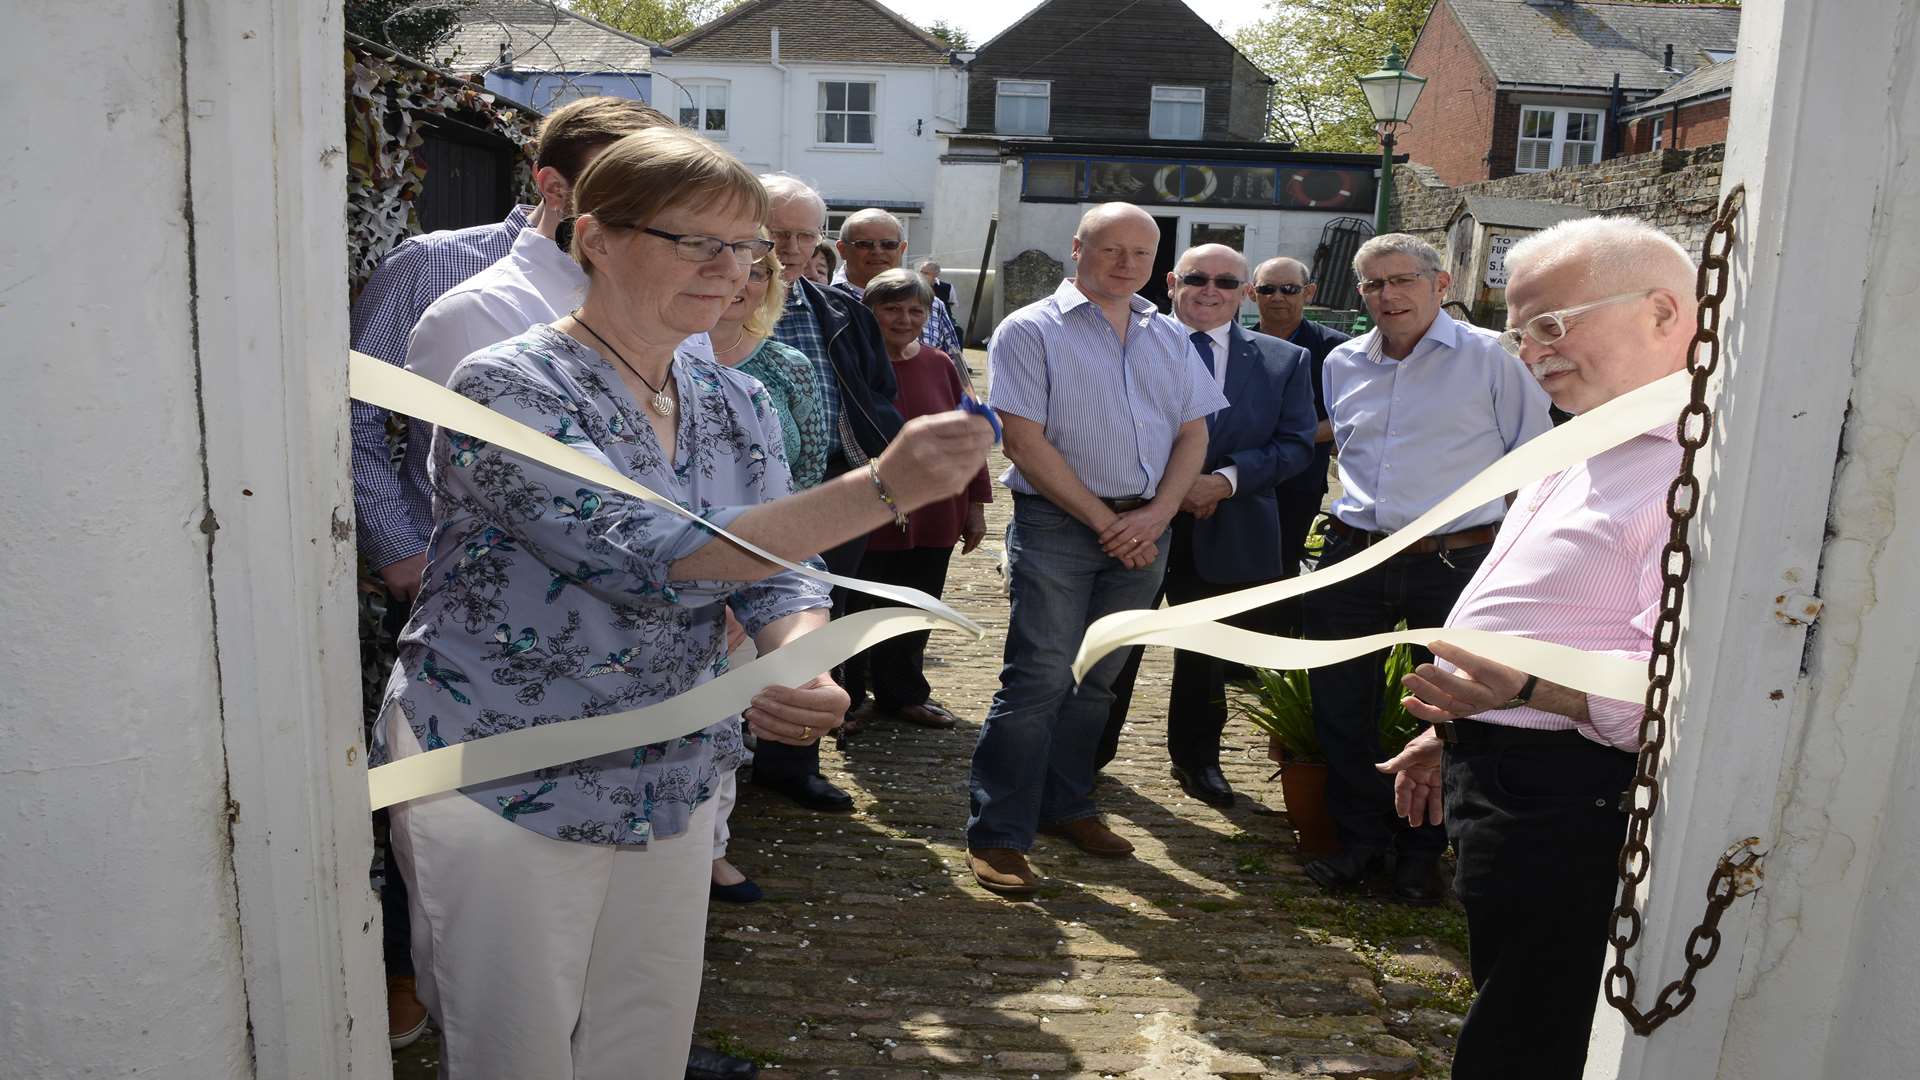 Joanne Turpin who donated one of her fathers' models Soverein of the Sea, cuts the ribbon.